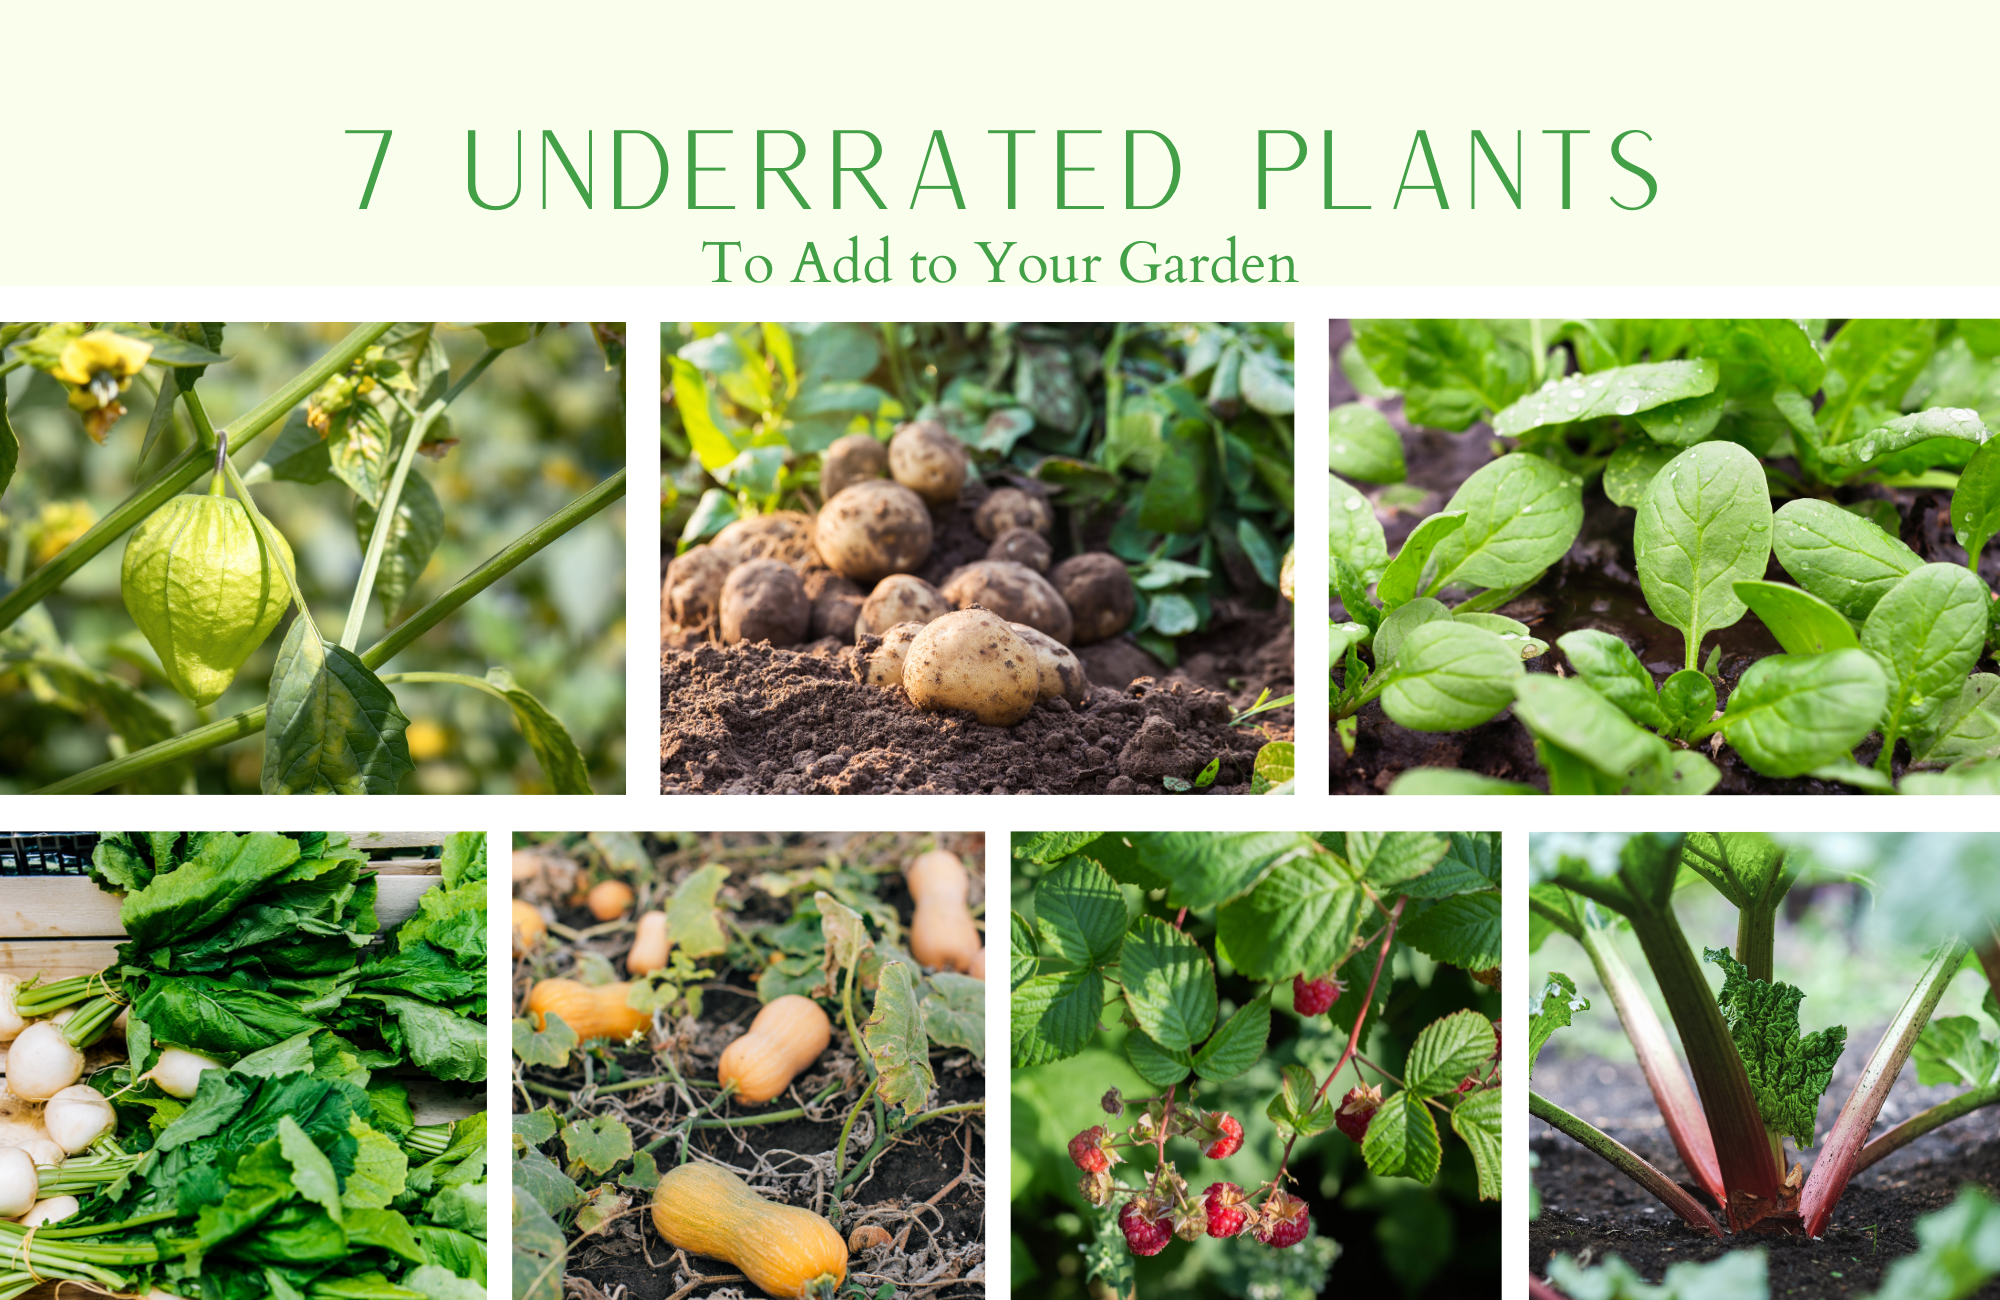 A collage of plant images with the words "7 Underrated Plants for Your Garden"